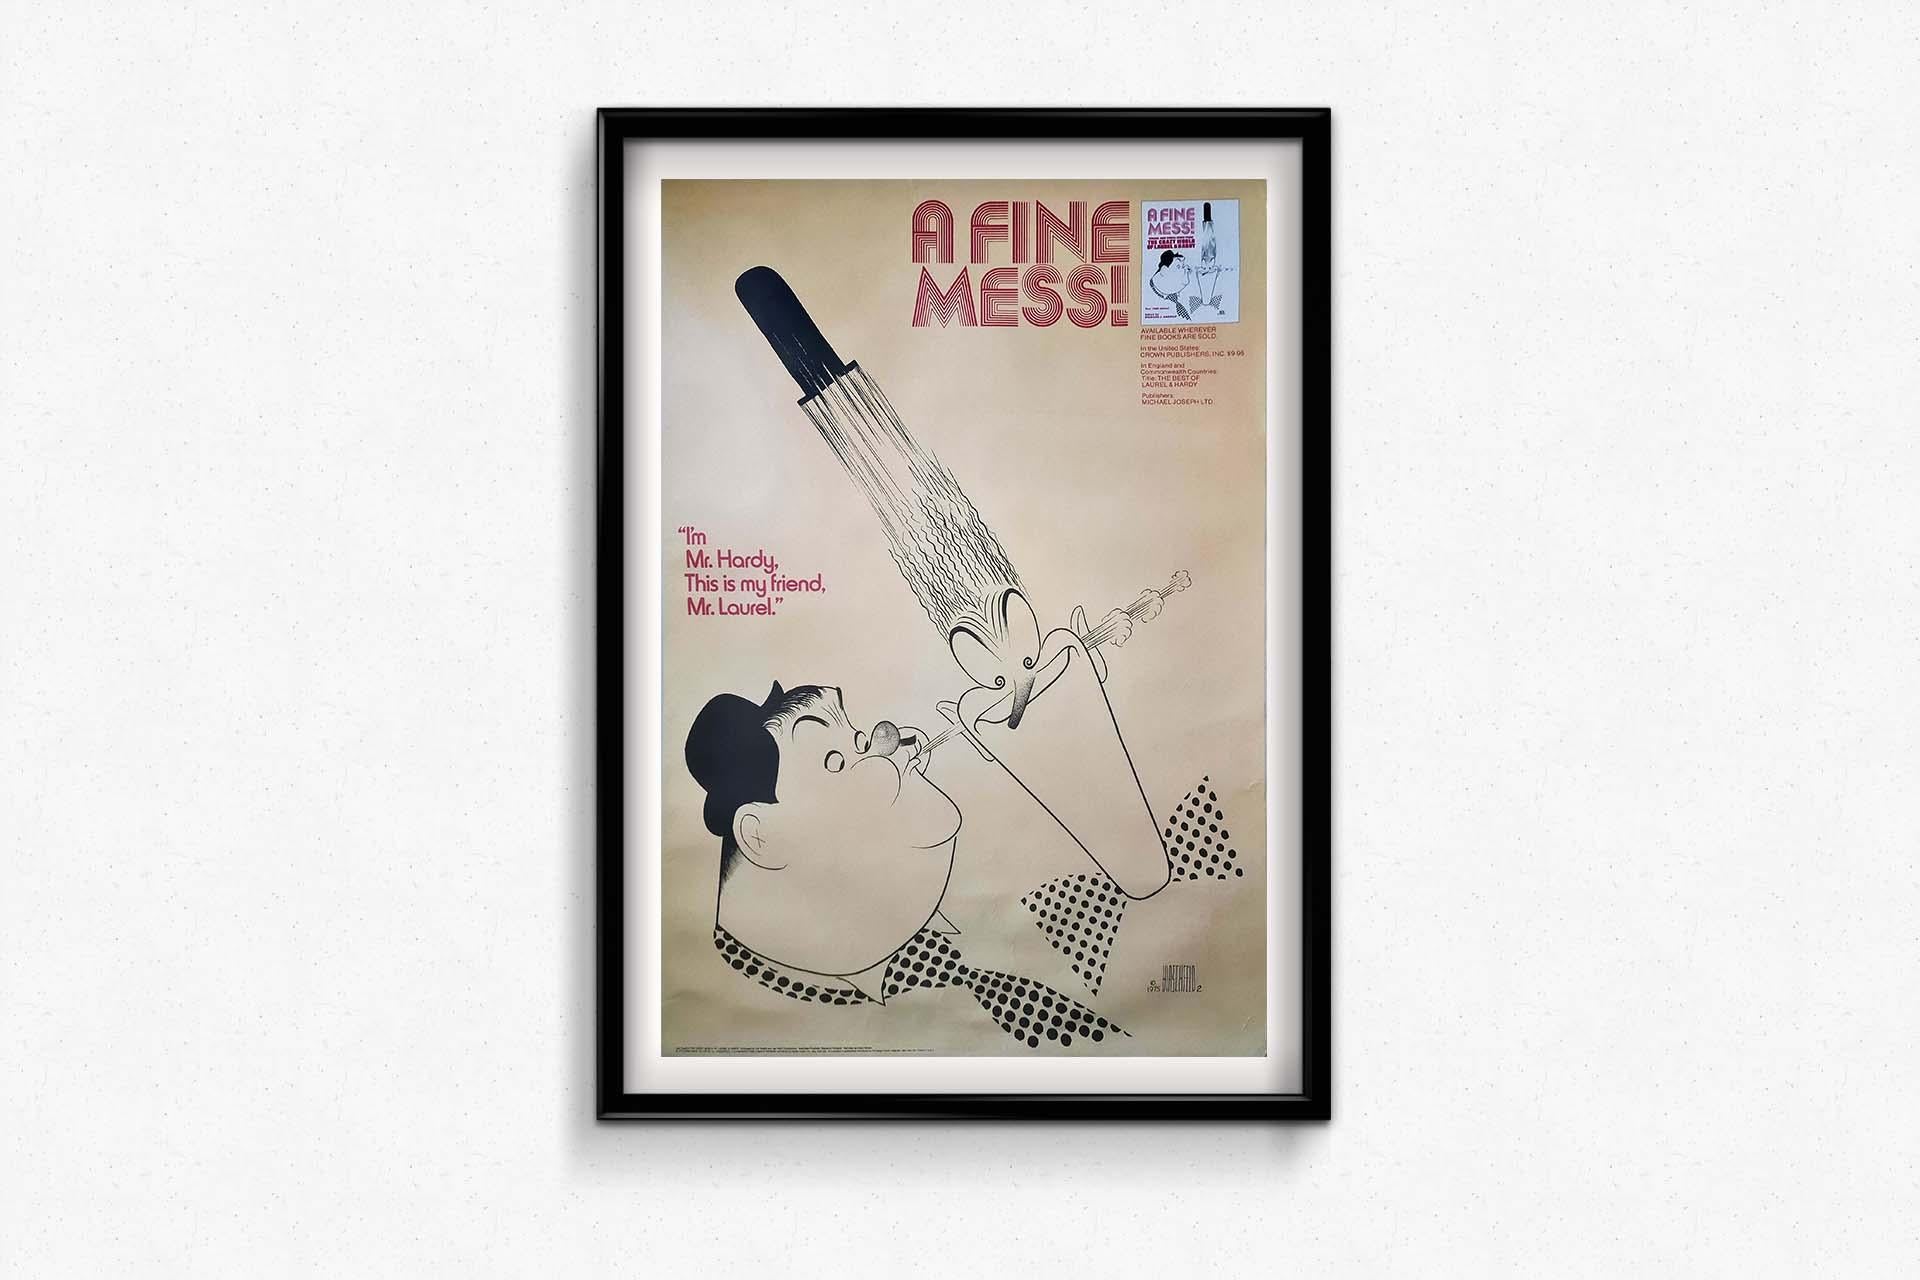 Crafted in 1975, the original poster by Al Hirschfeld titled 